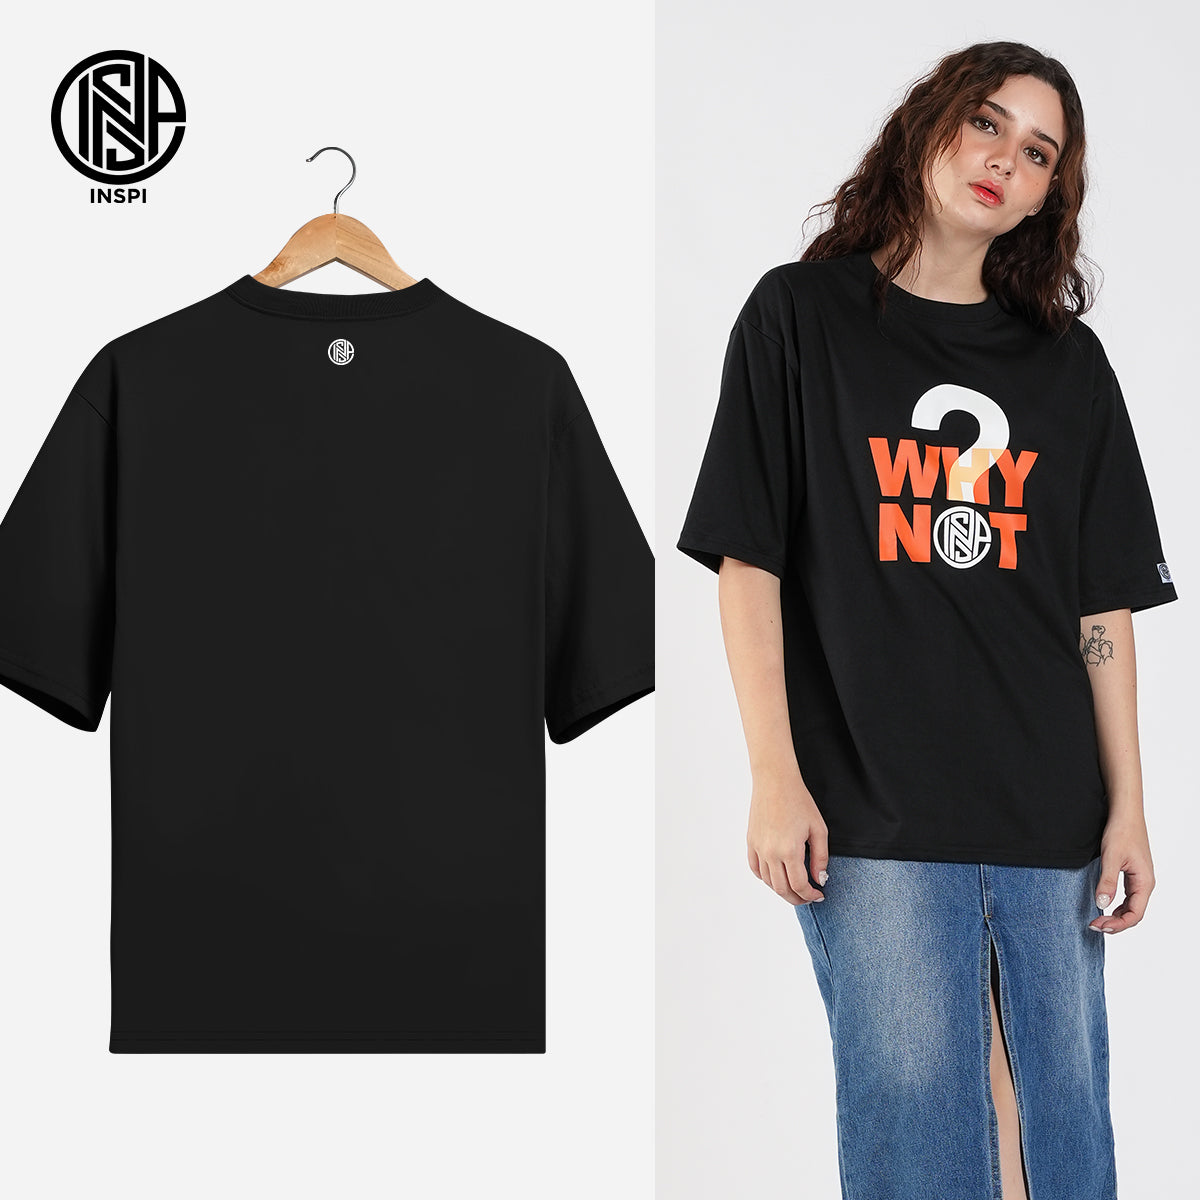 INSPI Originals Creators Oversized Tshirt For Men and Women Collection Plus Size Printed Shirt Loose Fit Round Neck Tees